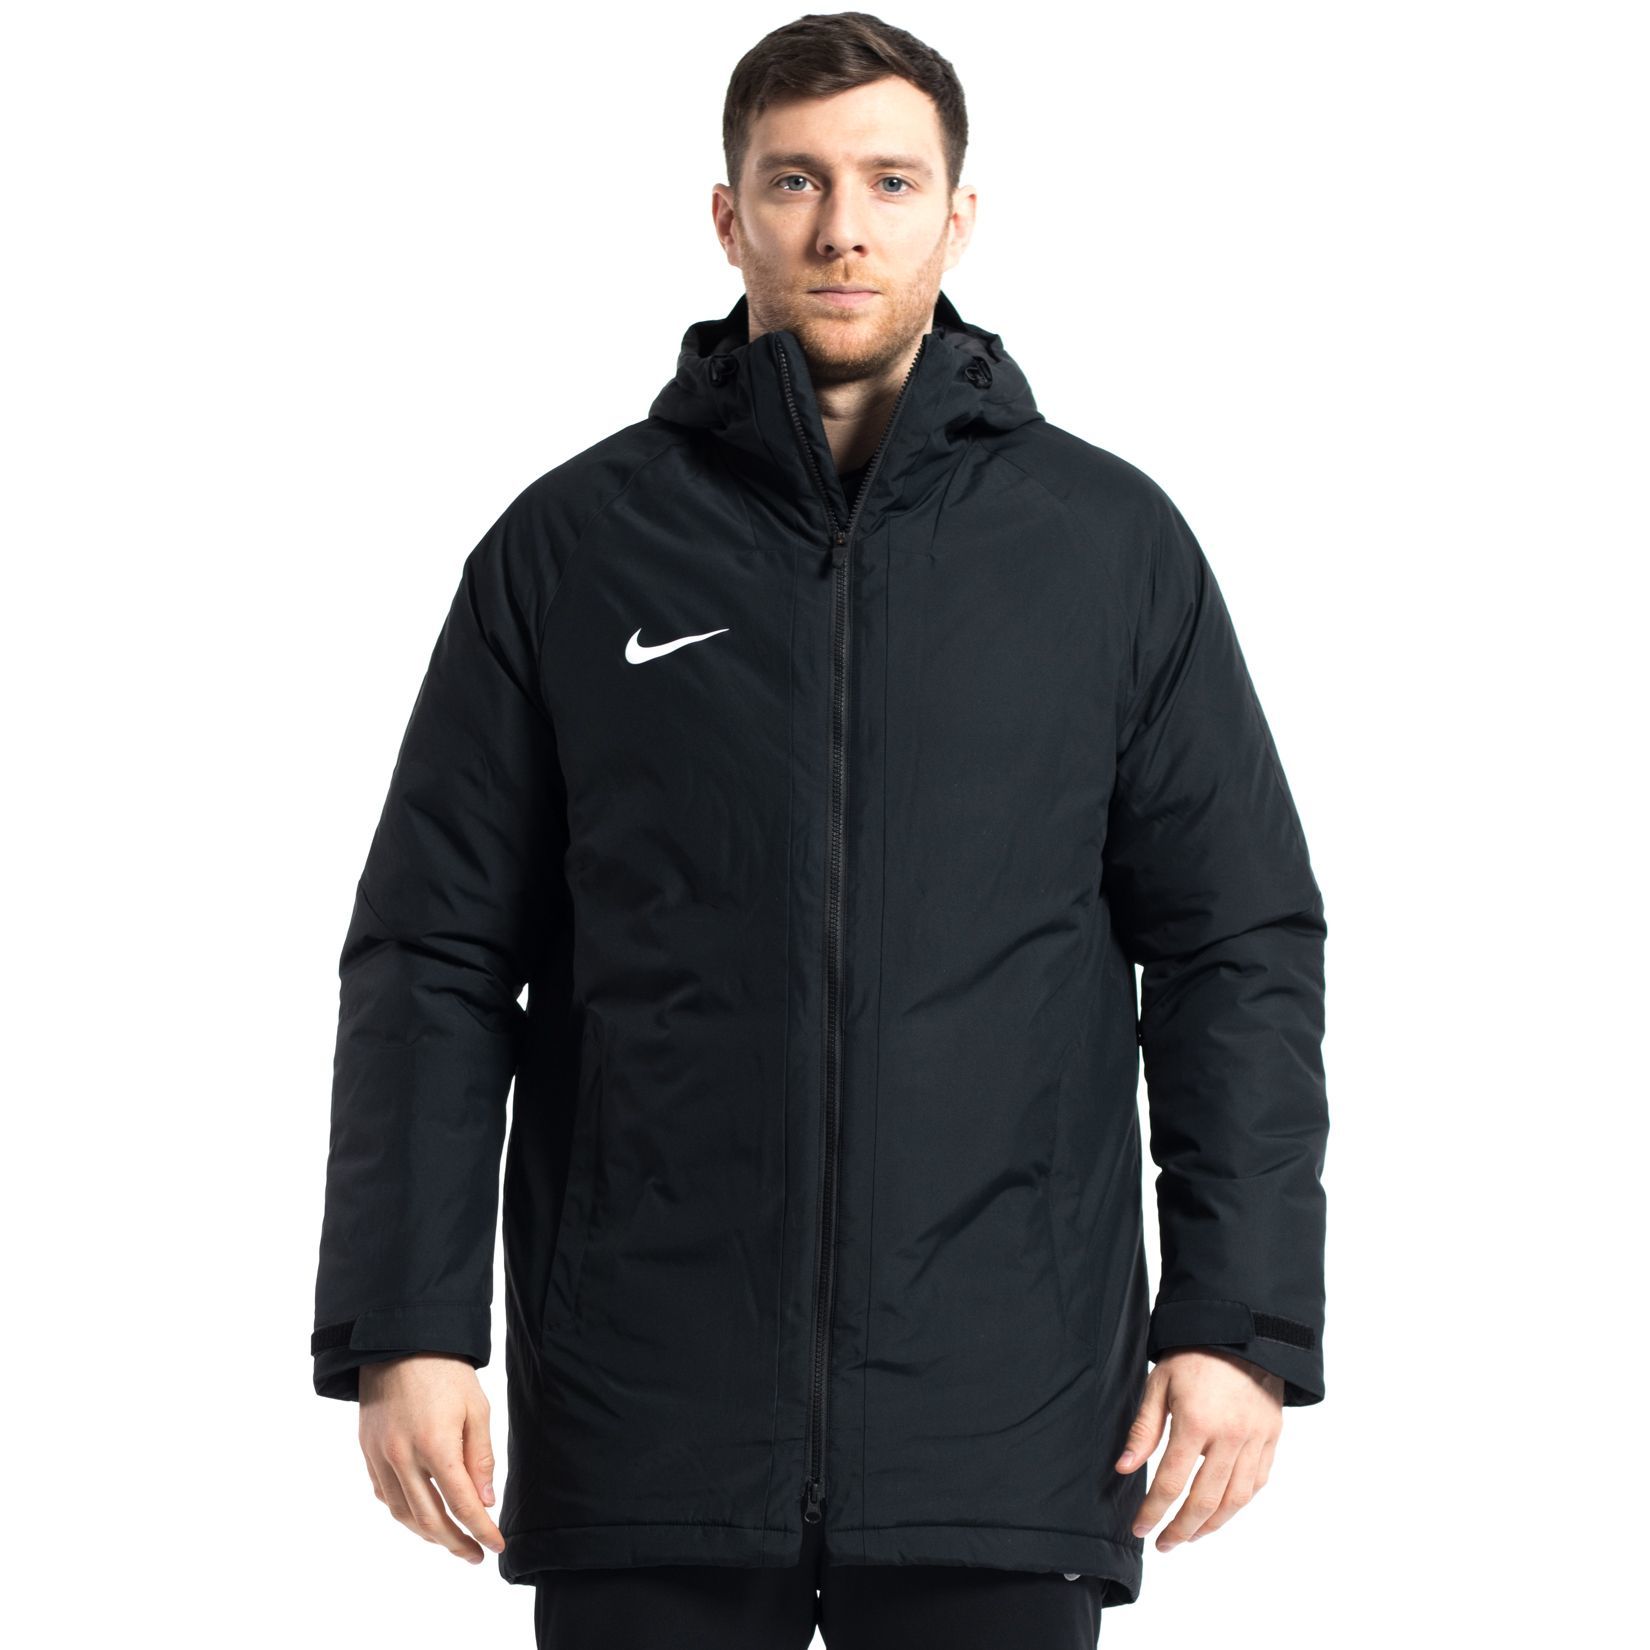 Nike Football Academy Hooded Jacket In Black Hot Sale, UP TO 70% OFF |  www.apmusicales.com